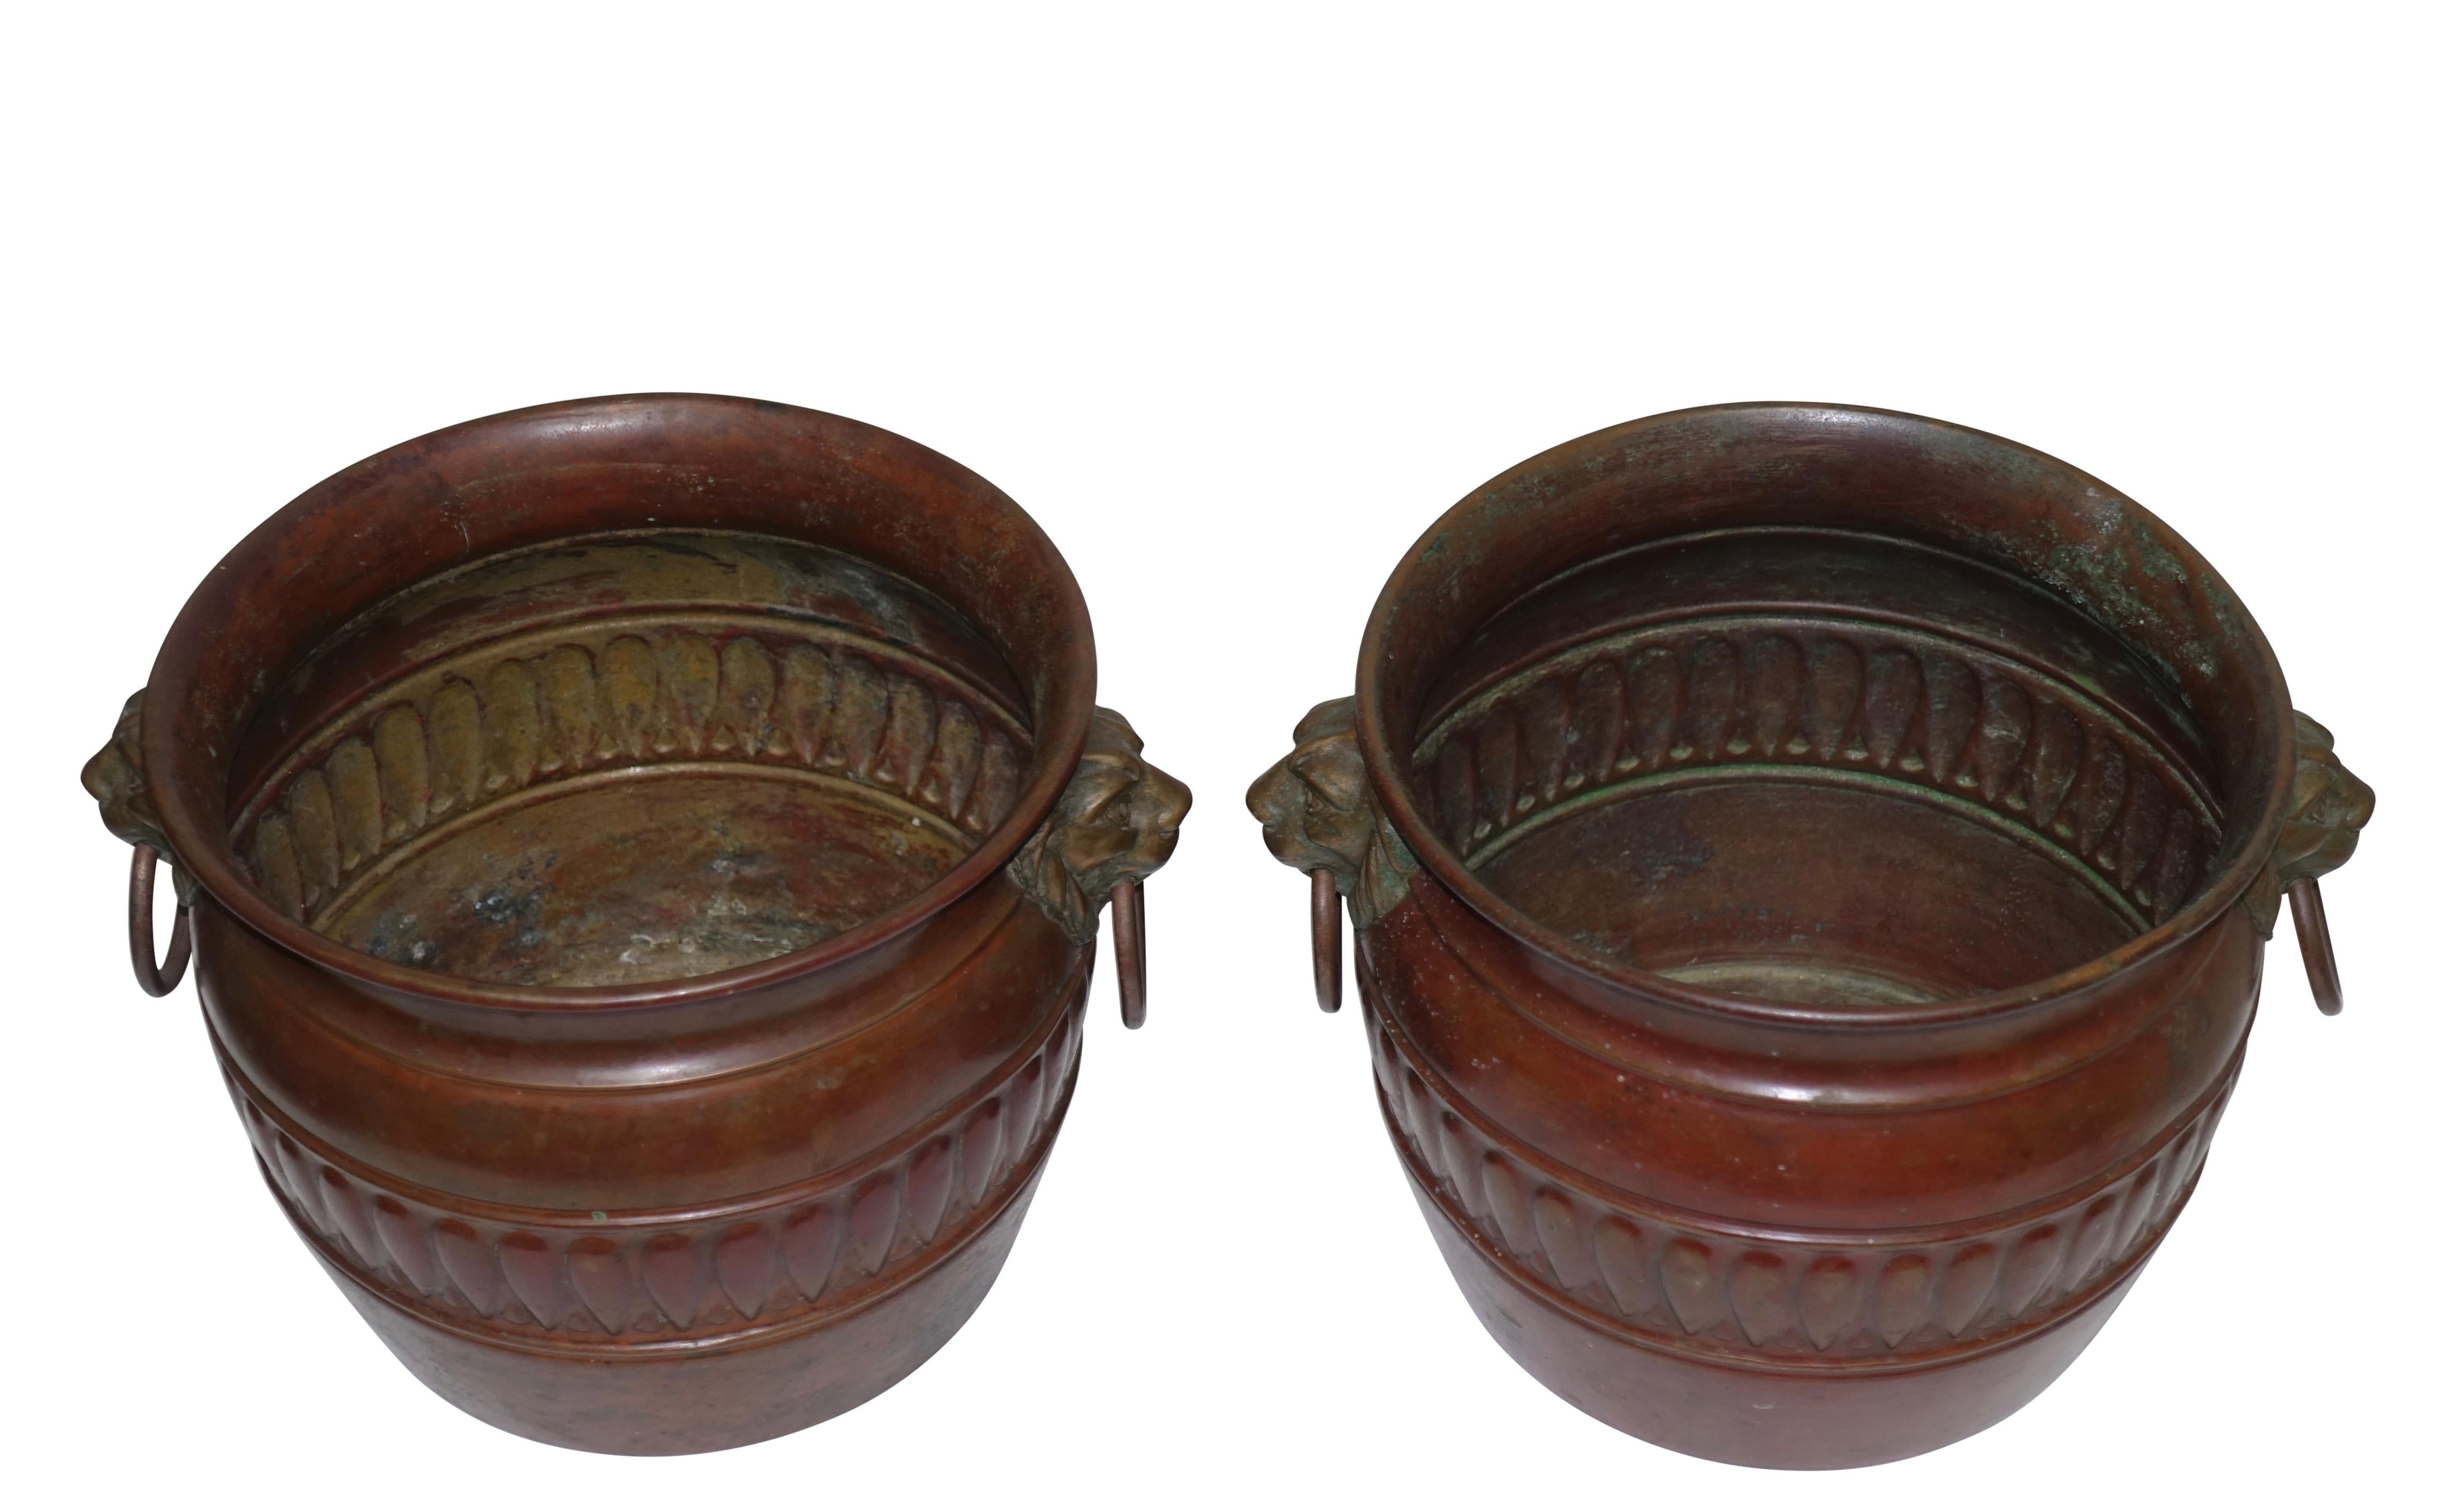 20th Century Vintage Copper Cachepots with Red Patinated Finish, Italian, circa 1930s